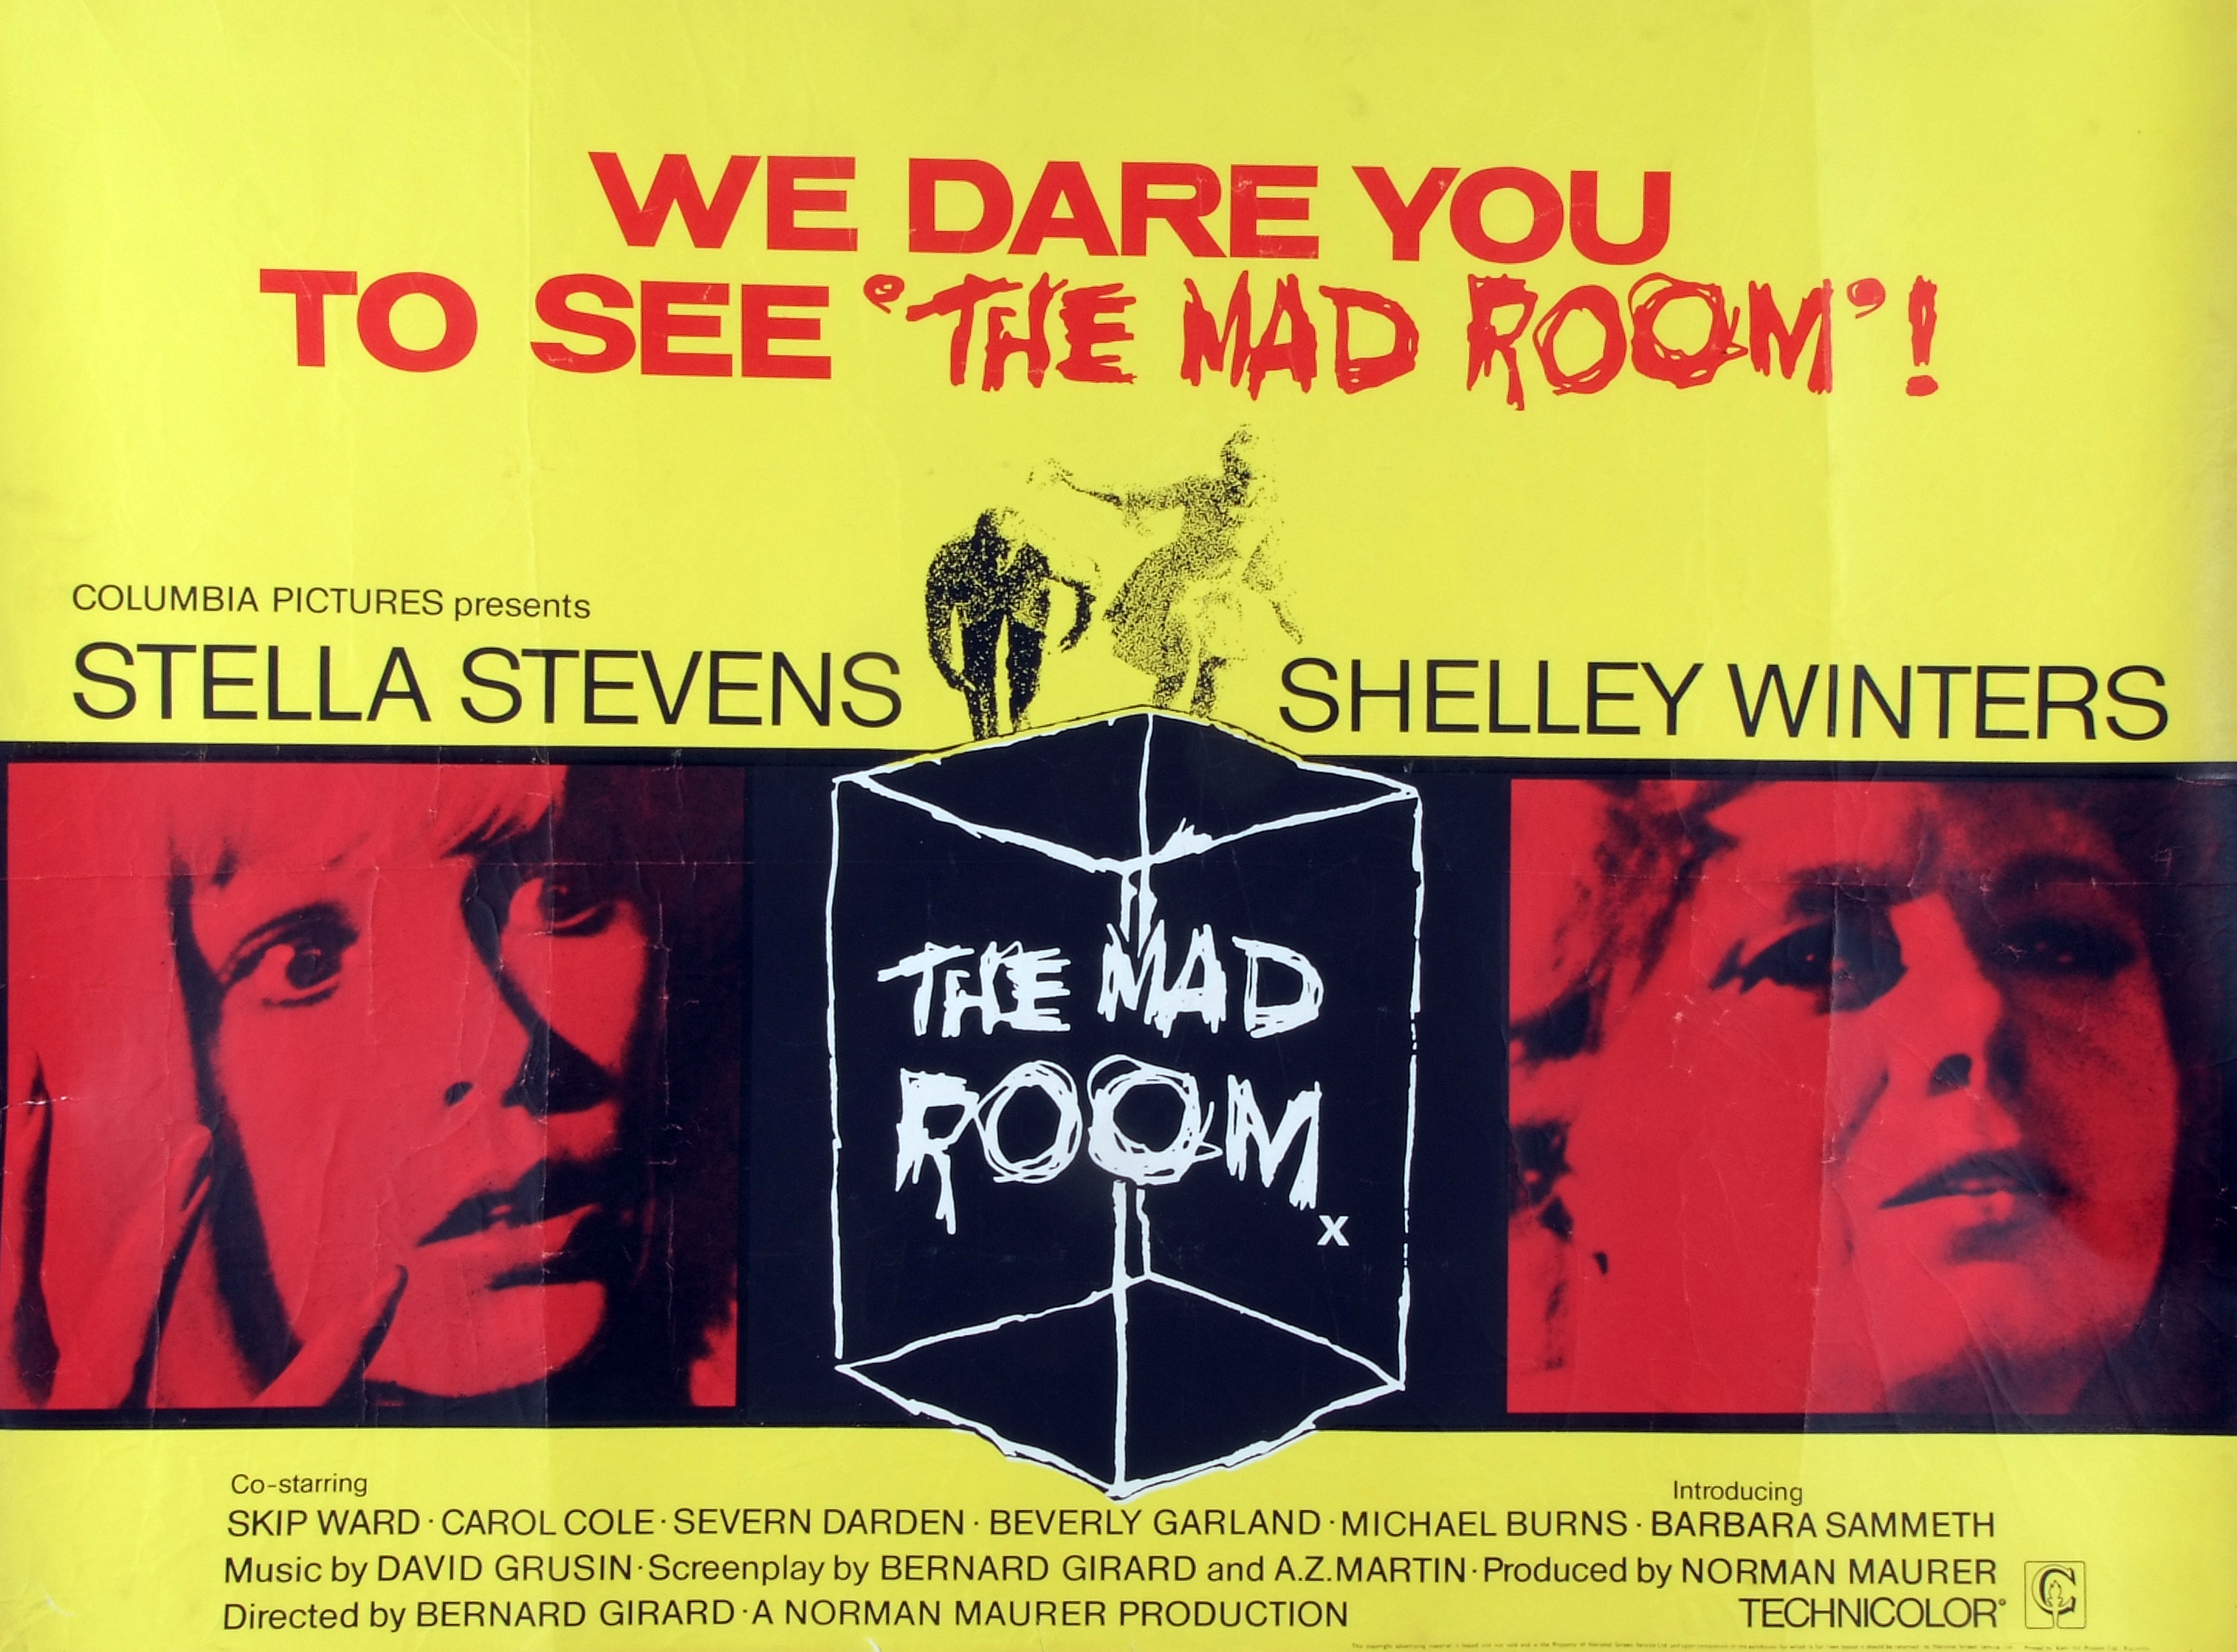 THE MAD ROOM, film poster, starring Stella Stevens and Shelley Winters, Quad approx 30" x 40"